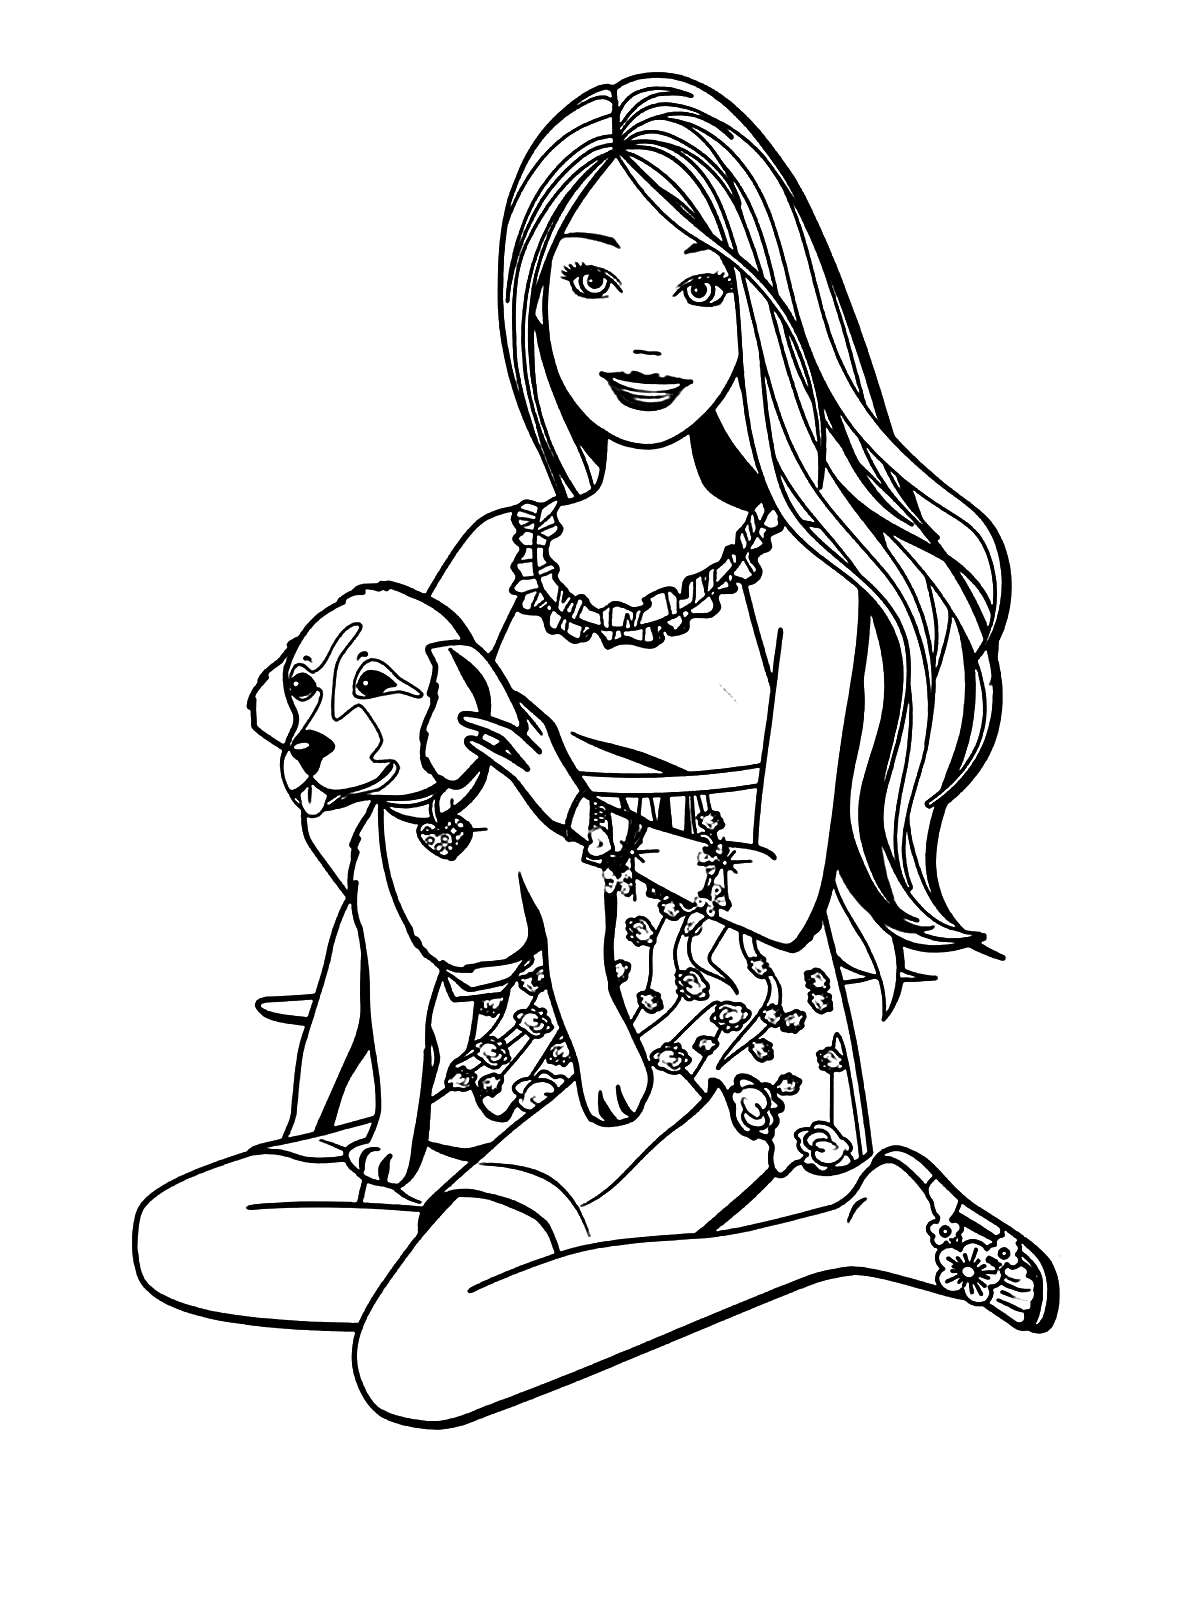 Coloring Page of Barbie with her pet dog